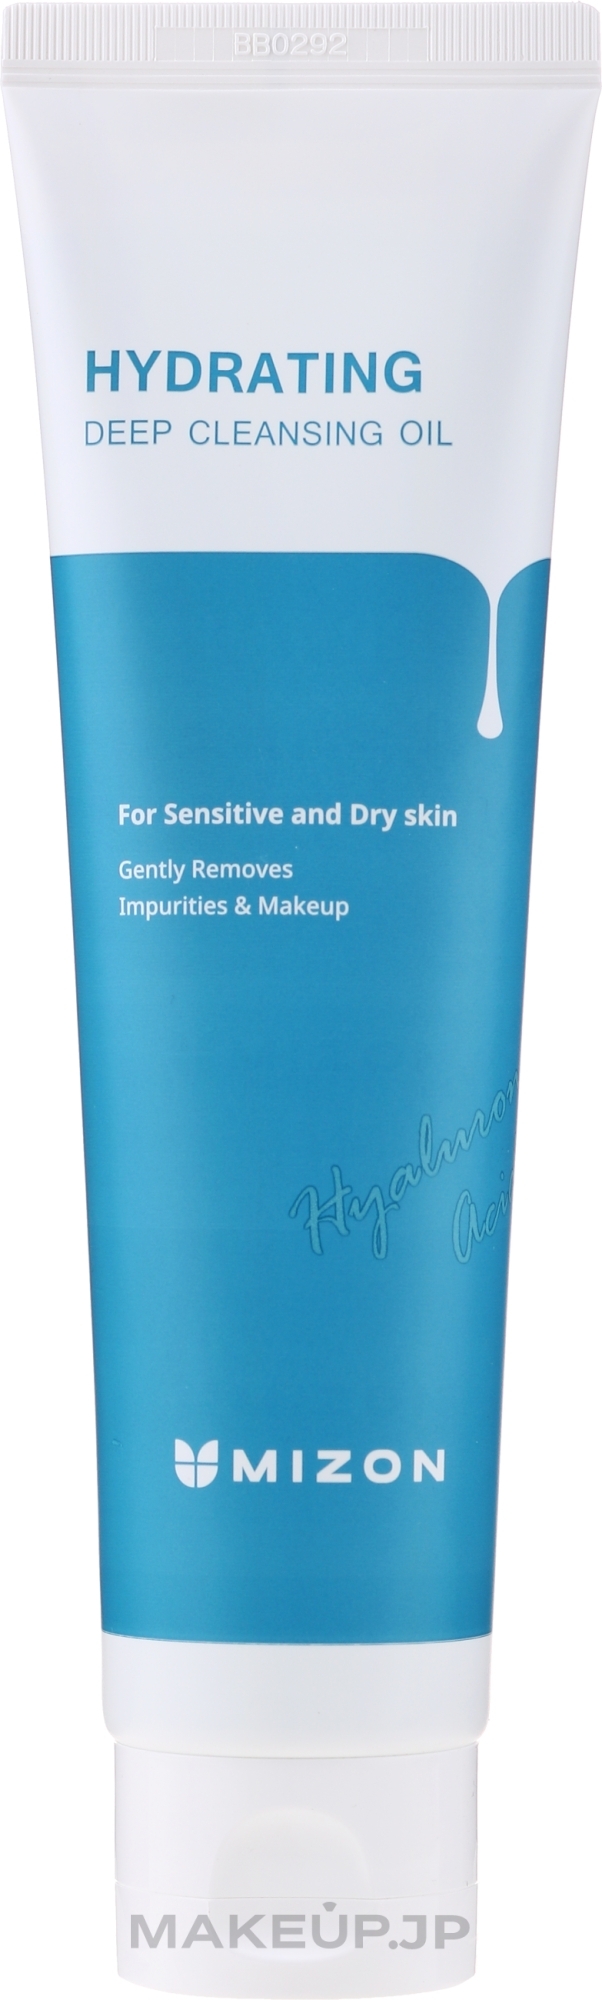 Hydrating Hydrophilic Oil with Hyaluronic Acid - Mizon Hydrating Deep Cleansing Oil — photo 150 ml